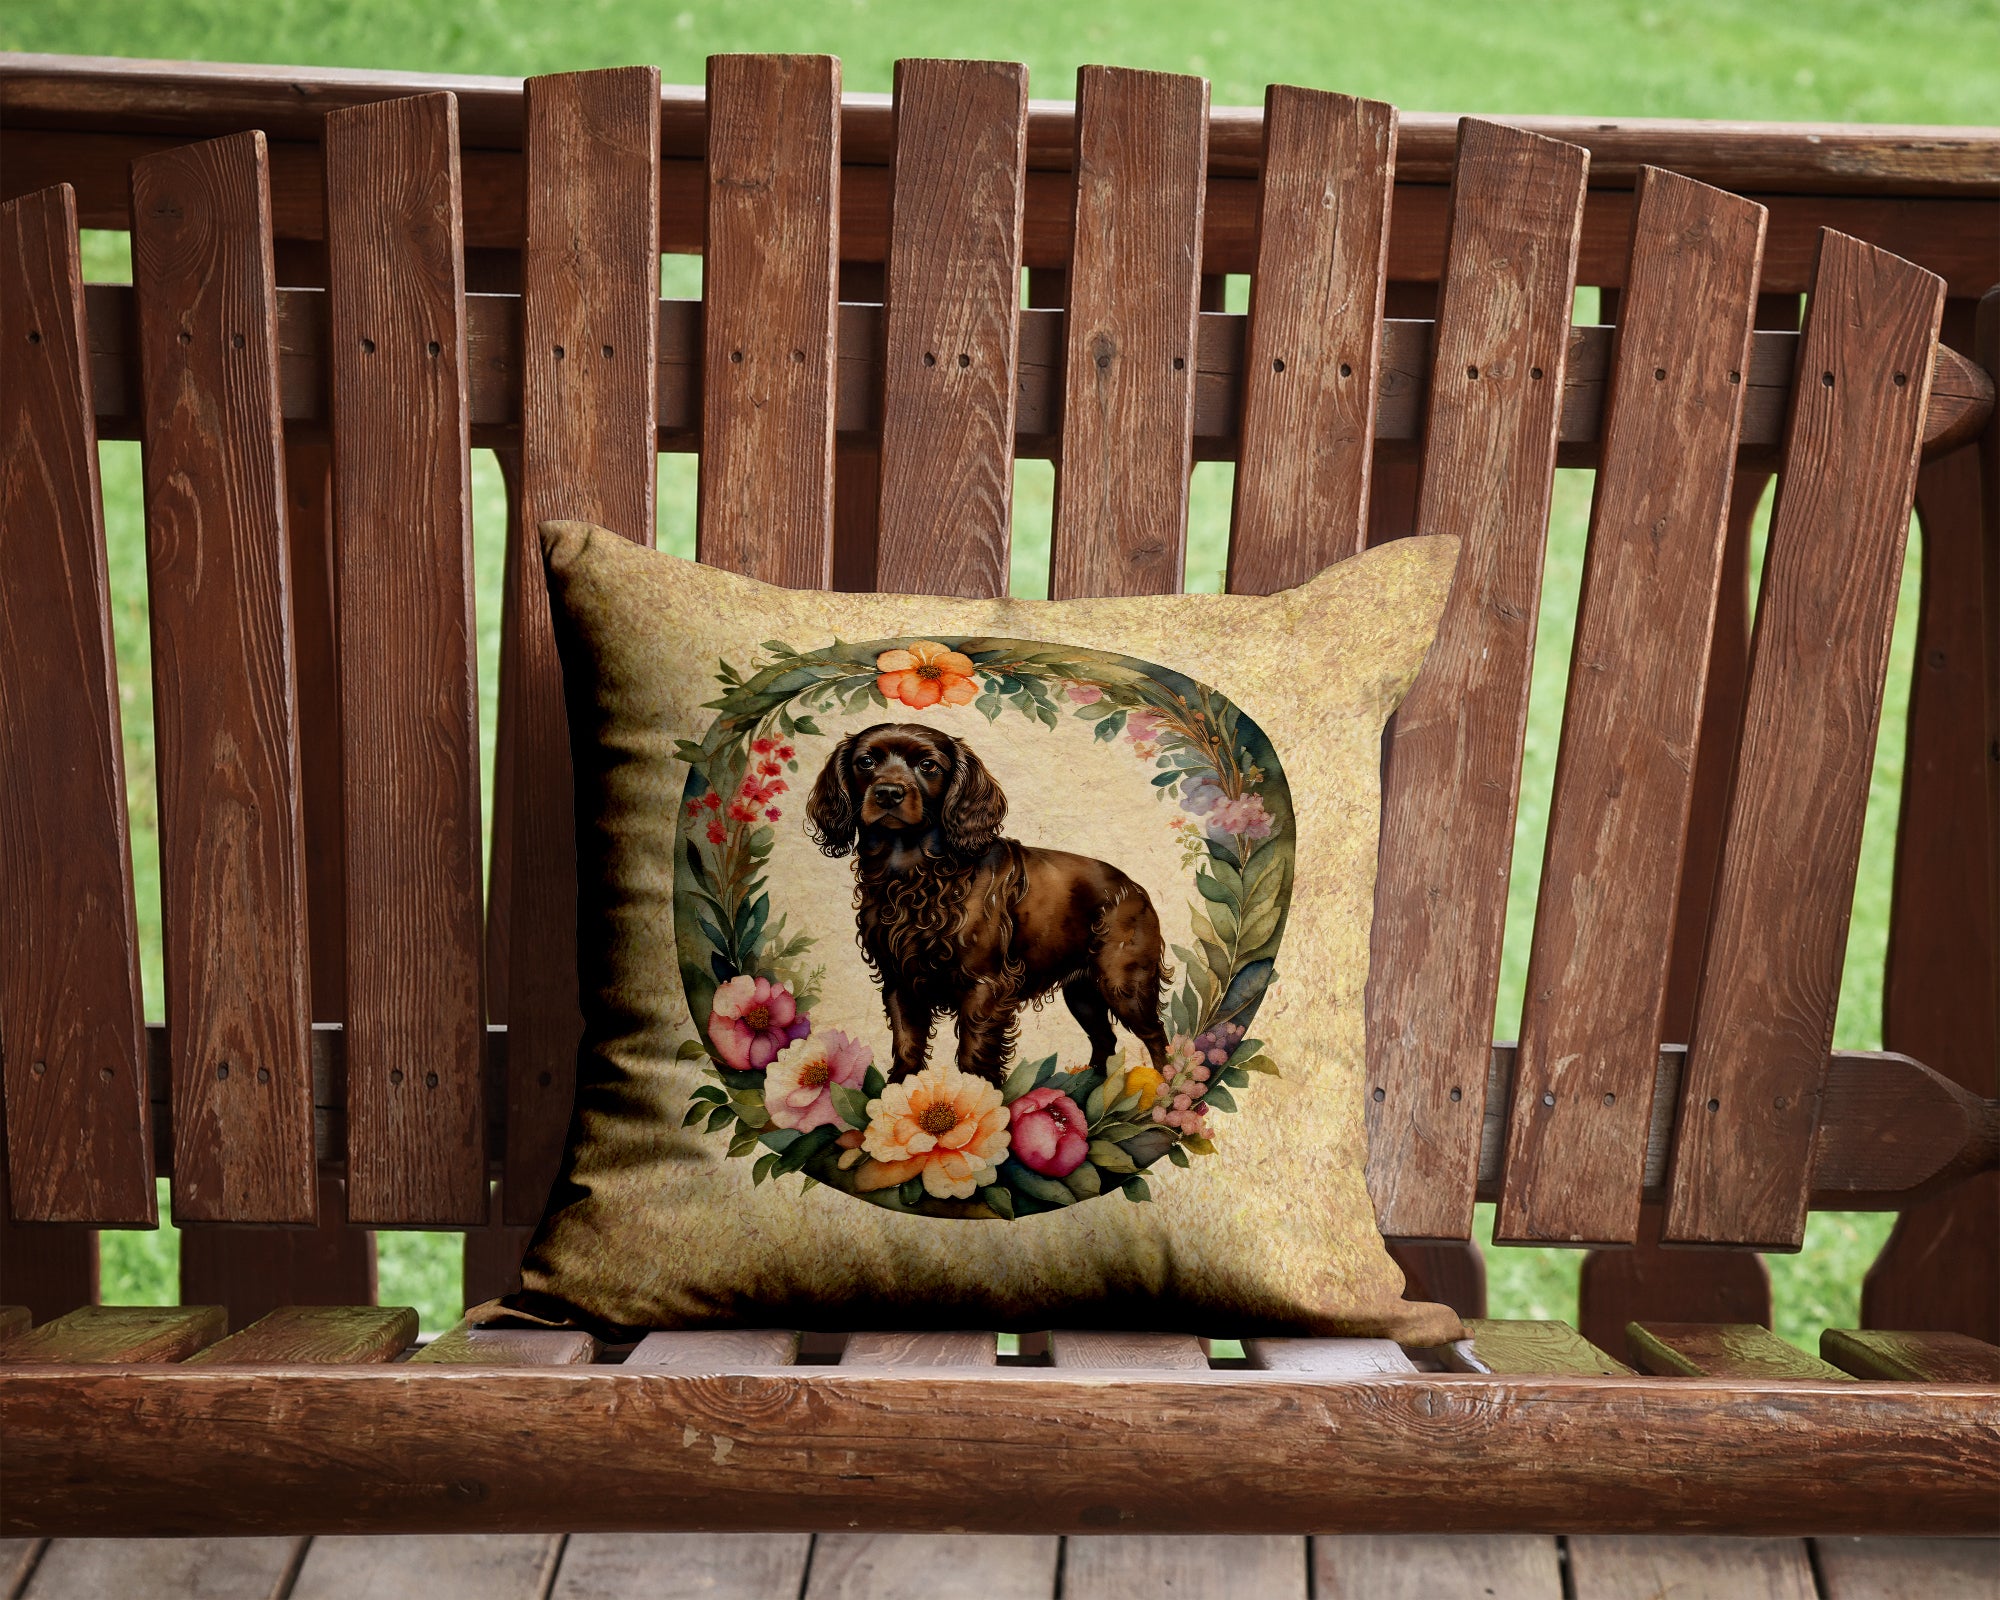 Boykin Spaniel and Flowers Fabric Decorative Pillow